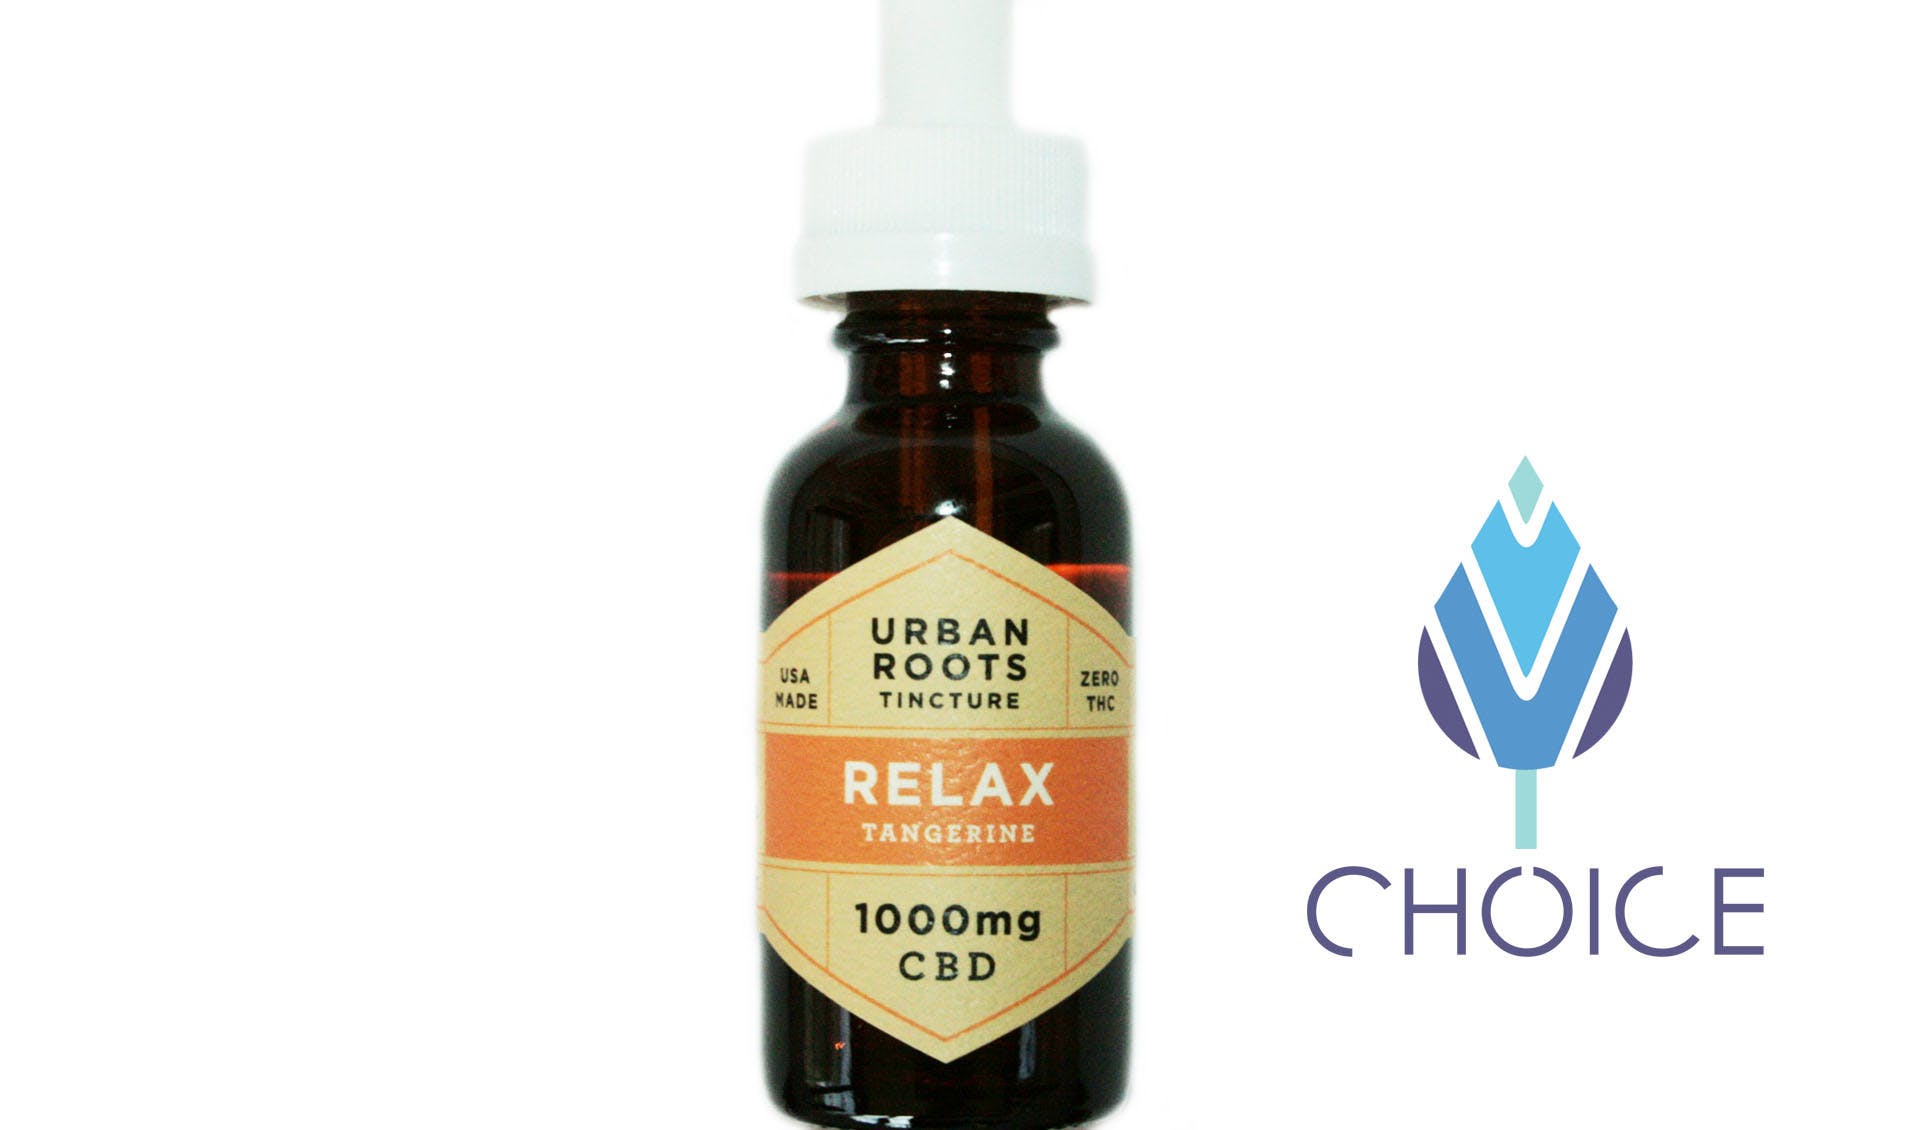 marijuana-dispensaries-choice-exit-145-in-jackson-1000mg-relax-tincture-by-urban-roots